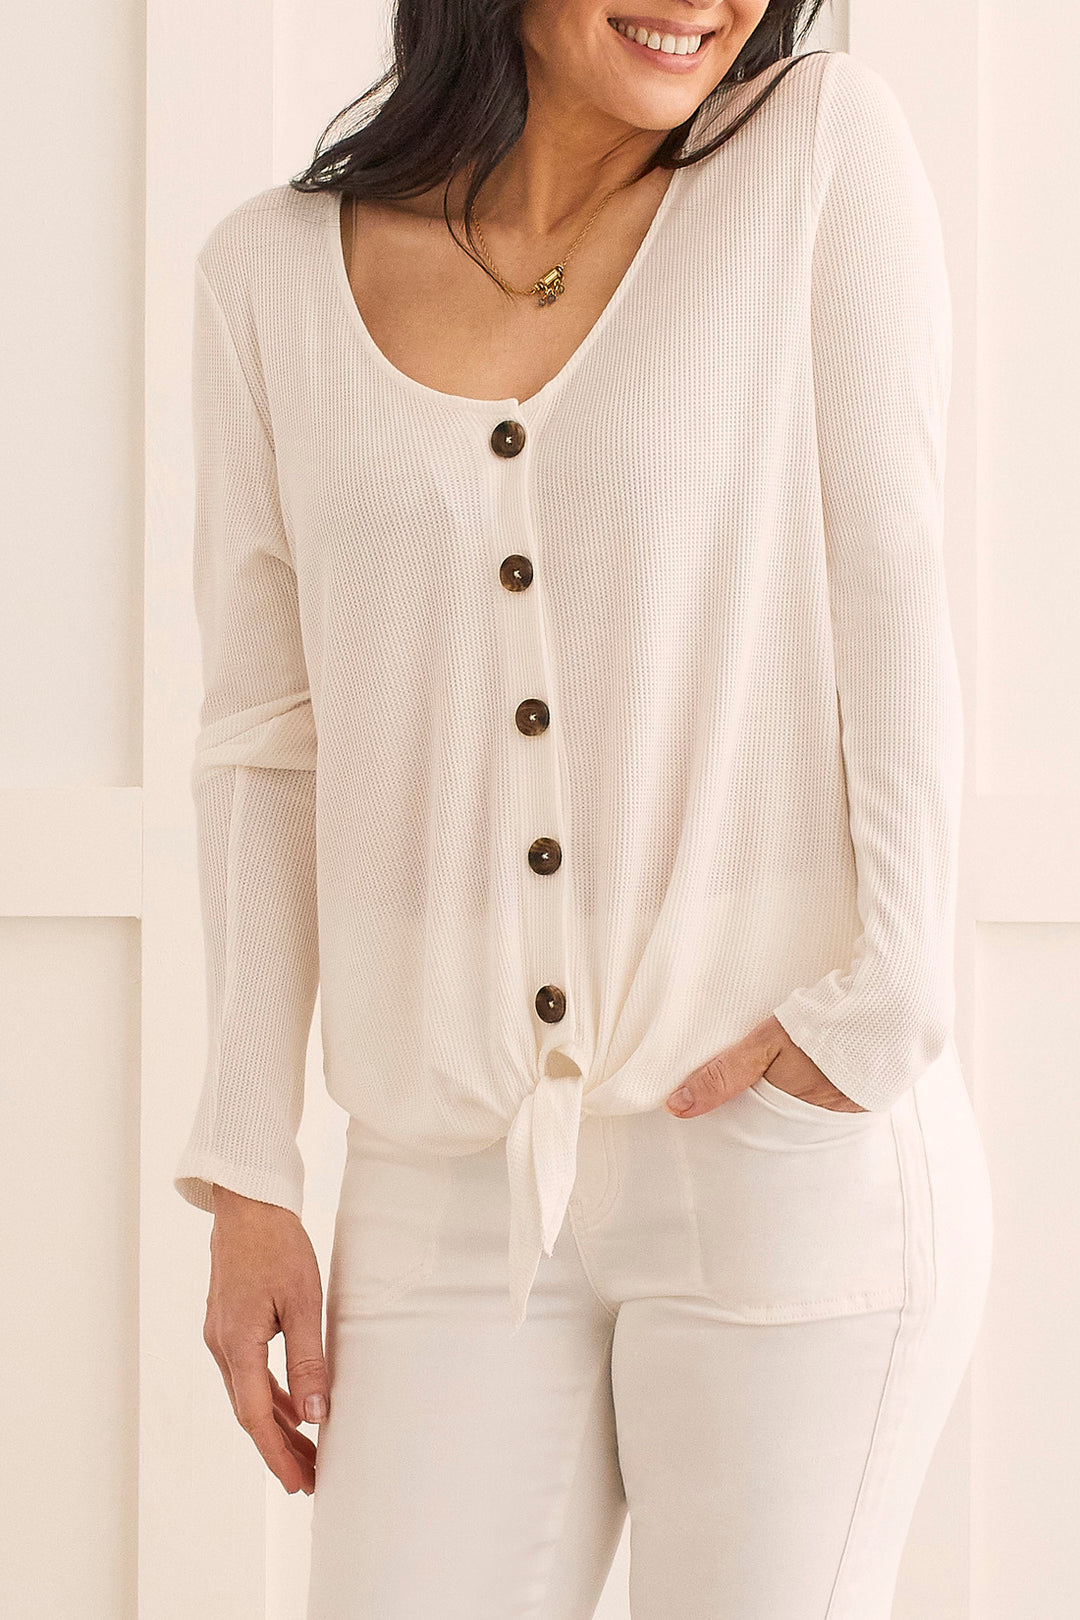 V-NECK TOP W/ BUTTONS & TIE FRONT - CREAM